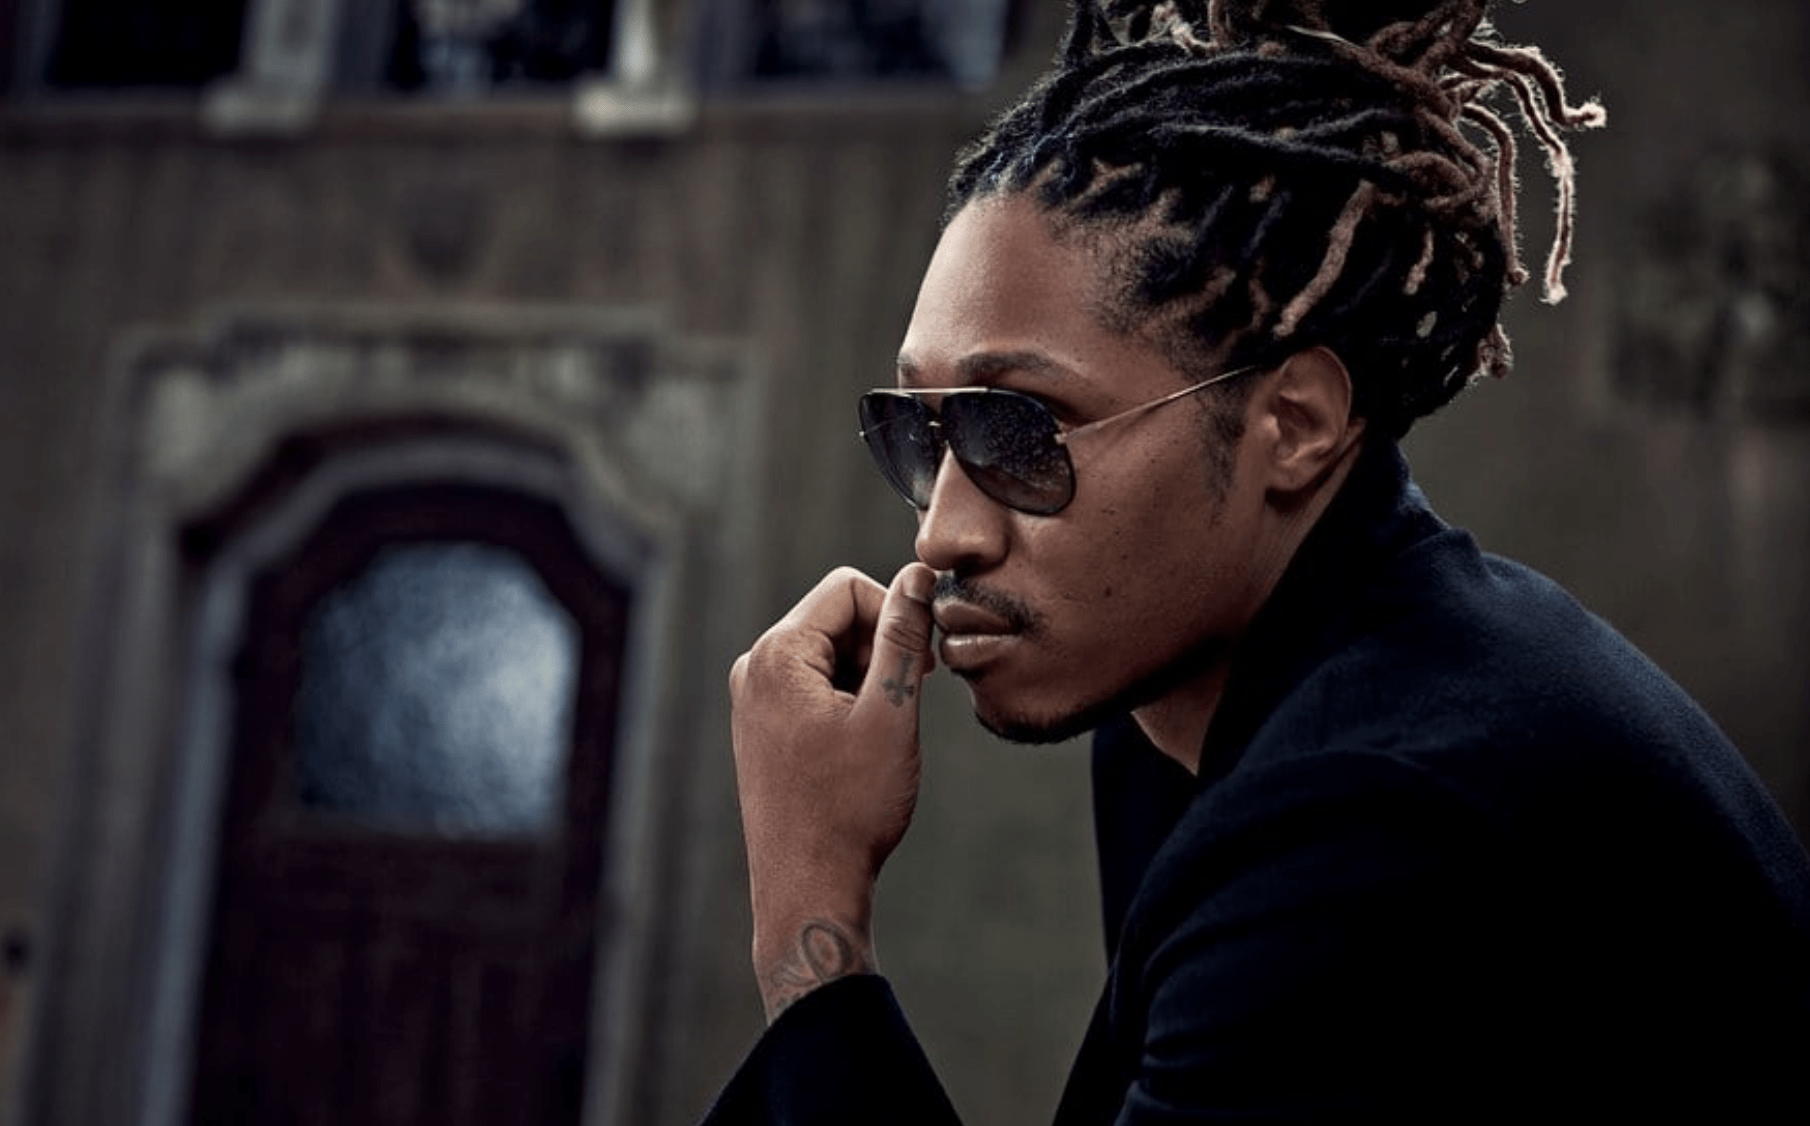 Future's Bodyguard Assault: He Will Reportedly Not Press Charges After Being Knocked Out